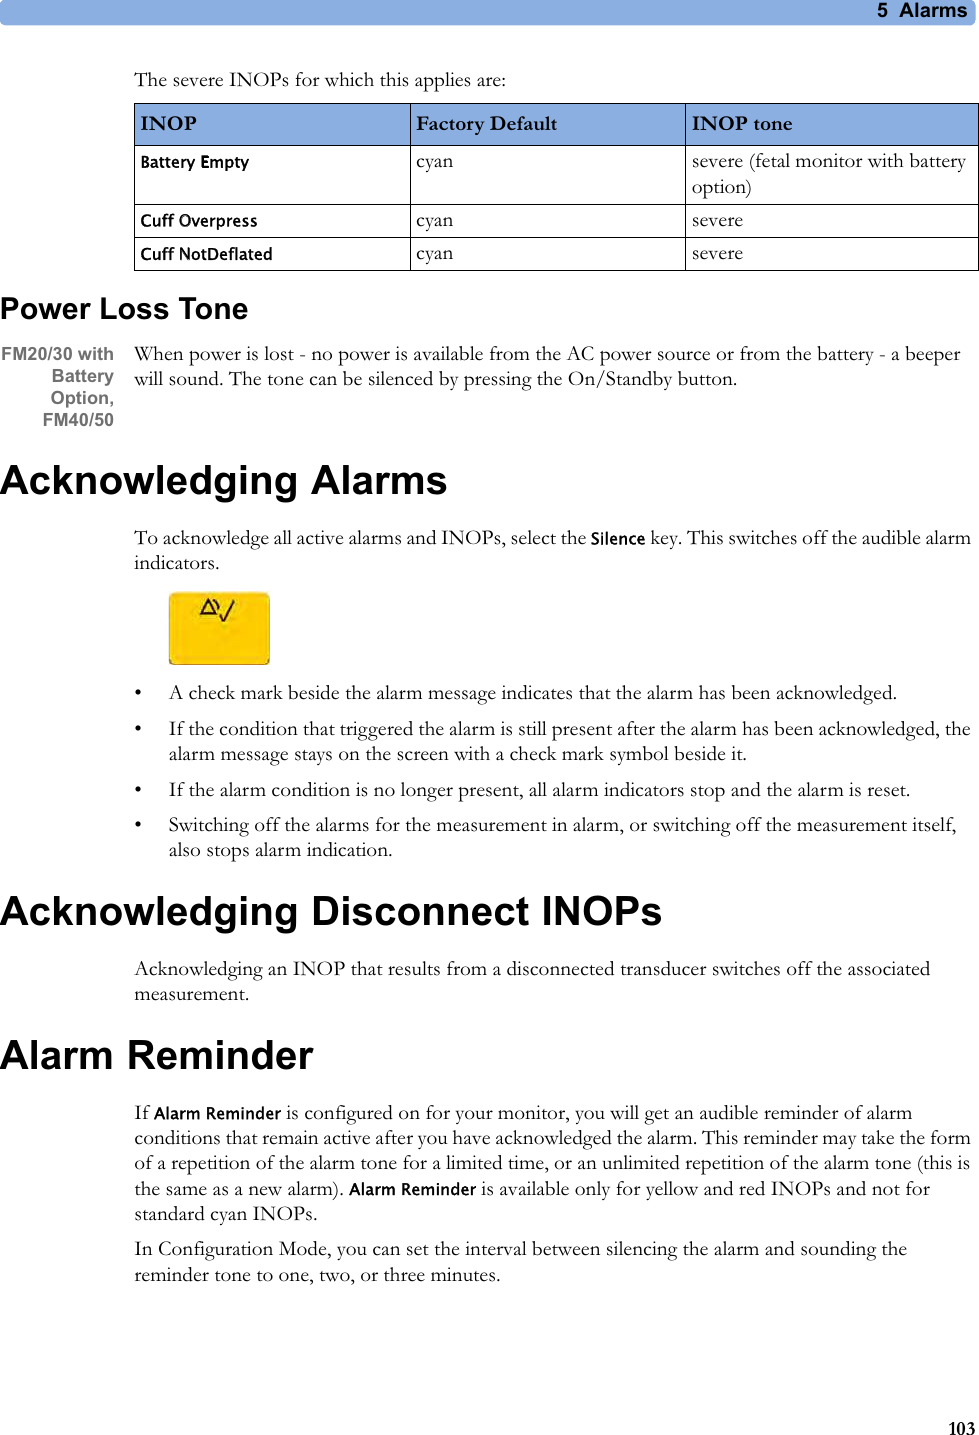 5  Alarms103The severe INOPs for which this applies are:Power Loss ToneFM20/30 with BatteryOption,FM40/50When power is lost - no power is available from the AC power source or from the battery - a beeper will sound. The tone can be silenced by pressing the On/Standby button.Acknowledging AlarmsTo acknowledge all active alarms and INOPs, select the Silence key. This switches off the audible alarm indicators.• A check mark beside the alarm message indicates that the alarm has been acknowledged.• If the condition that triggered the alarm is still present after the alarm has been acknowledged, the alarm message stays on the screen with a check mark symbol beside it.• If the alarm condition is no longer present, all alarm indicators stop and the alarm is reset.• Switching off the alarms for the measurement in alarm, or switching off the measurement itself, also stops alarm indication.Acknowledging Disconnect INOPsAcknowledging an INOP that results from a disconnected transducer switches off the associated measurement.Alarm ReminderIf Alarm Reminder is configured on for your monitor, you will get an audible reminder of alarm conditions that remain active after you have acknowledged the alarm. This reminder may take the form of a repetition of the alarm tone for a limited time, or an unlimited repetition of the alarm tone (this is the same as a new alarm). Alarm Reminder is available only for yellow and red INOPs and not for standard cyan INOPs.In Configuration Mode, you can set the interval between silencing the alarm and sounding the reminder tone to one, two, or three minutes.INOP Factory Default INOP toneBattery Empty cyan severe (fetal monitor with battery option)Cuff Overpress cyan severeCuff NotDeflated cyan severe